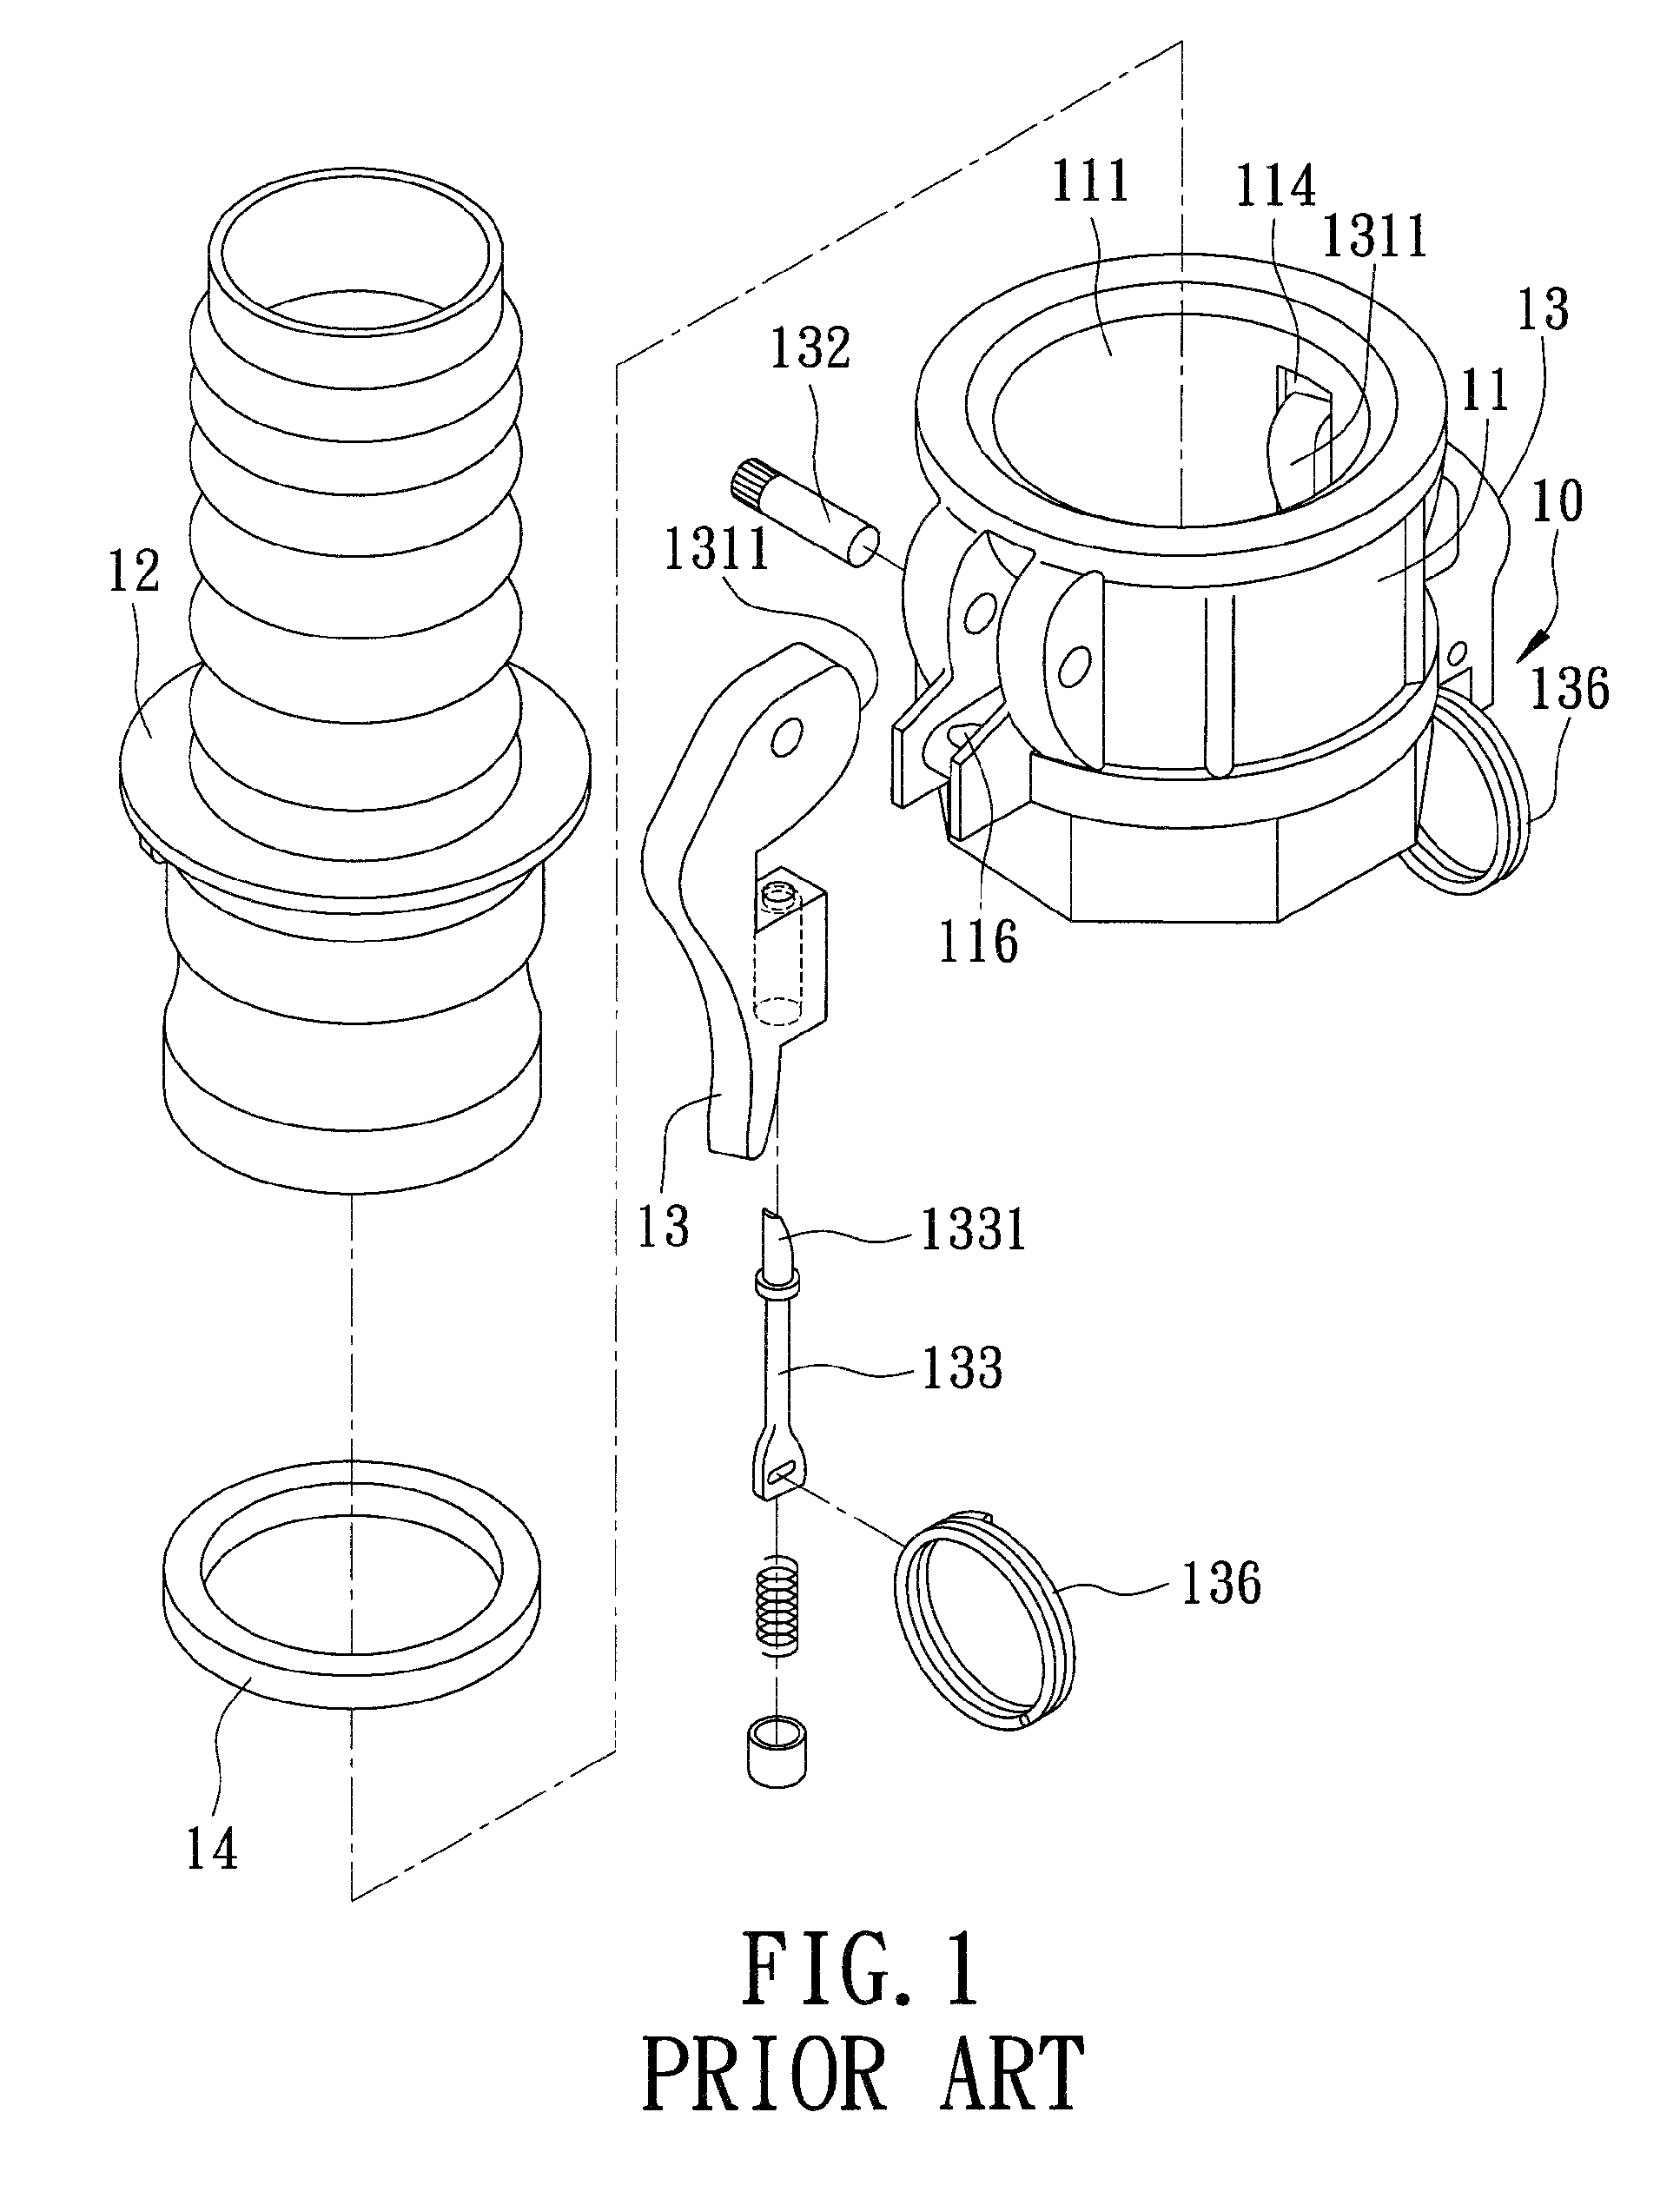 Easily unlatchable cam-lock actuating device for use in a locking coupling assembly that couples two tubular members